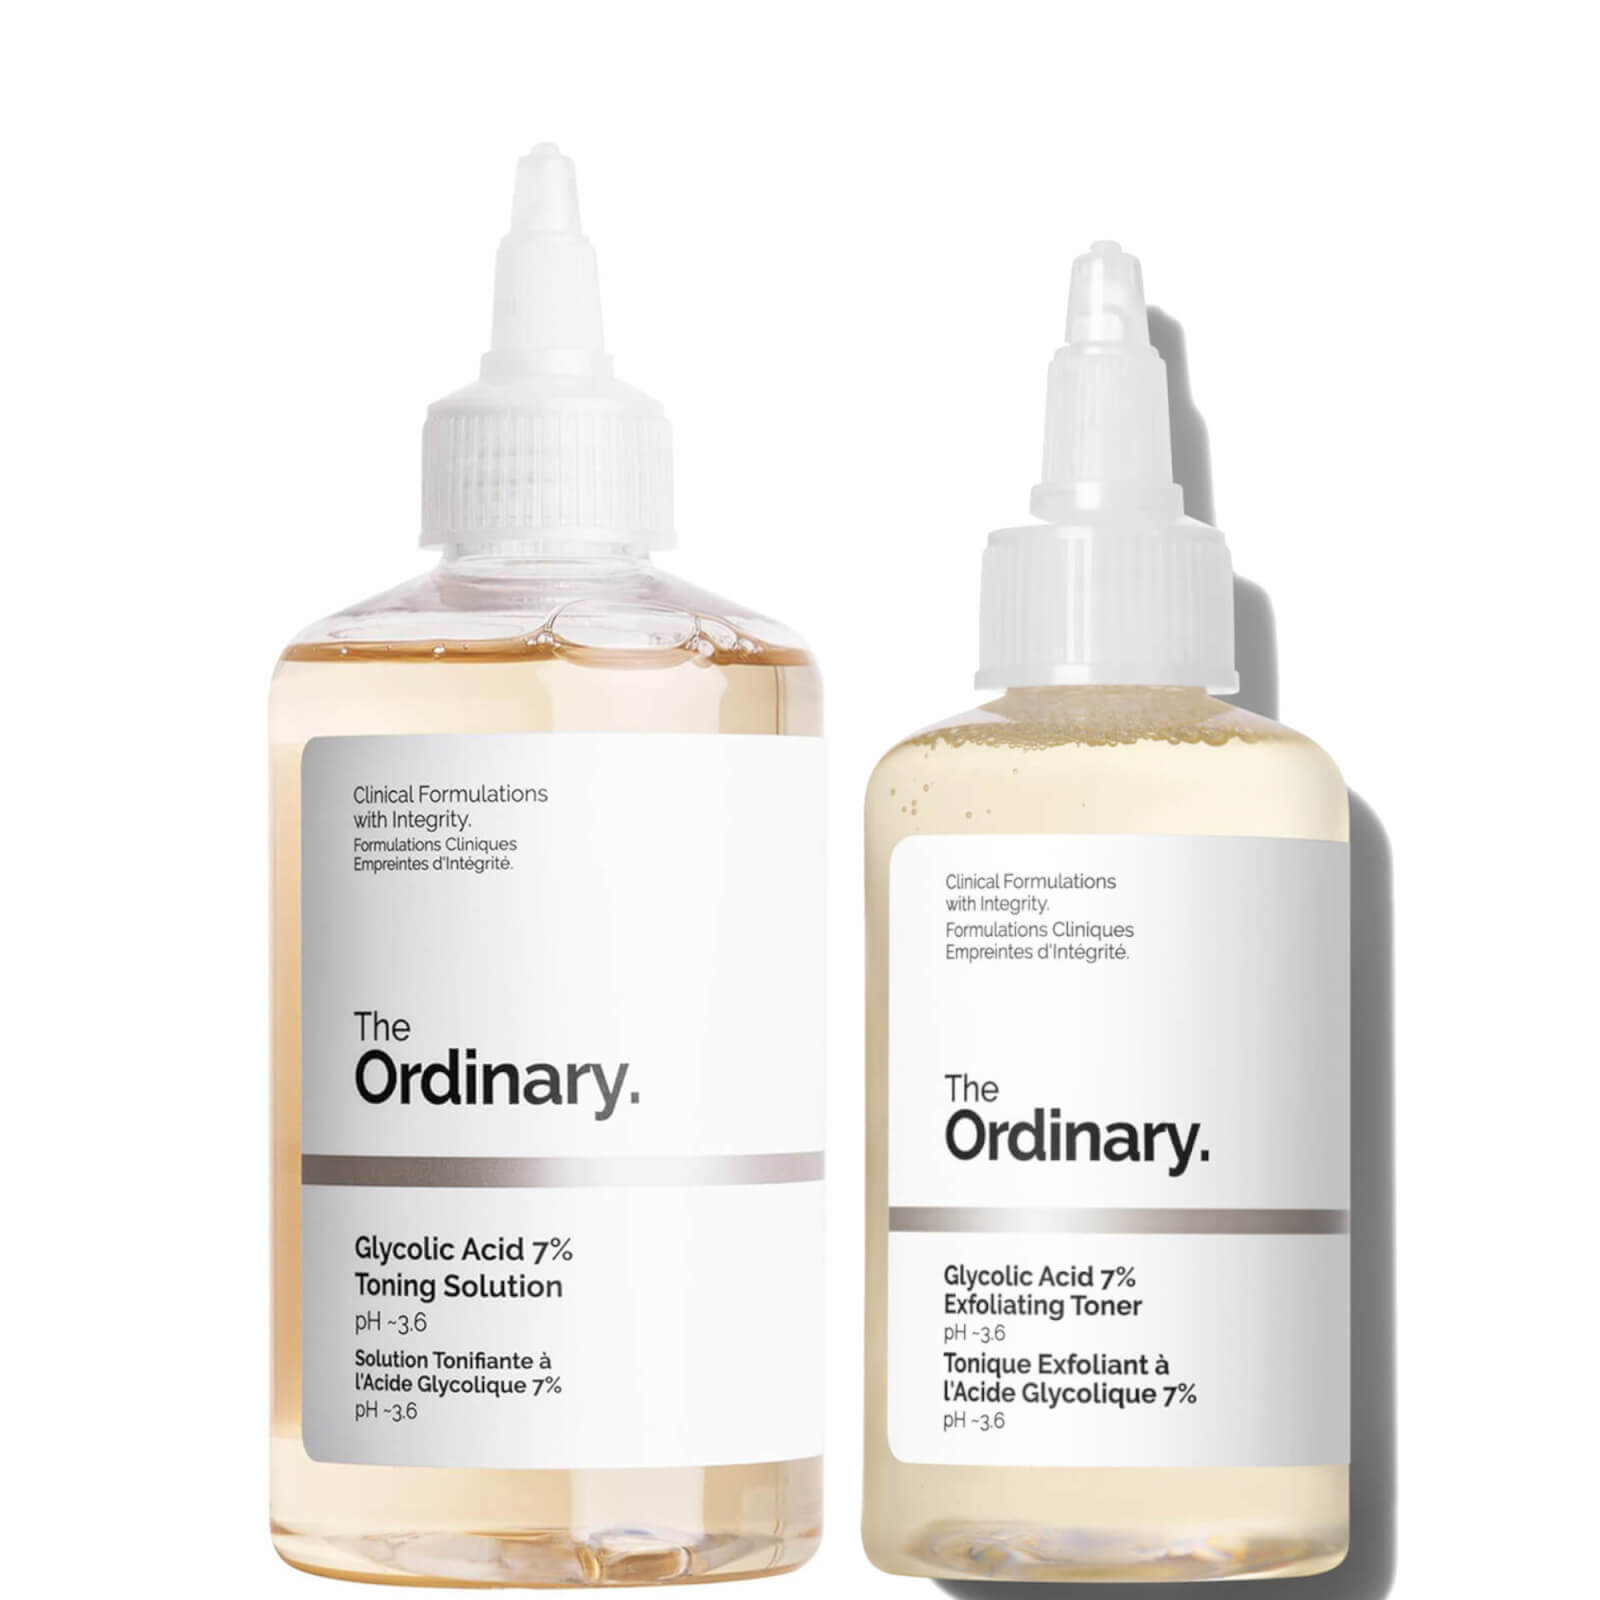 The Ordinary's Glycolic Acid 7% Exfoliating Toner Home and Away Bundle